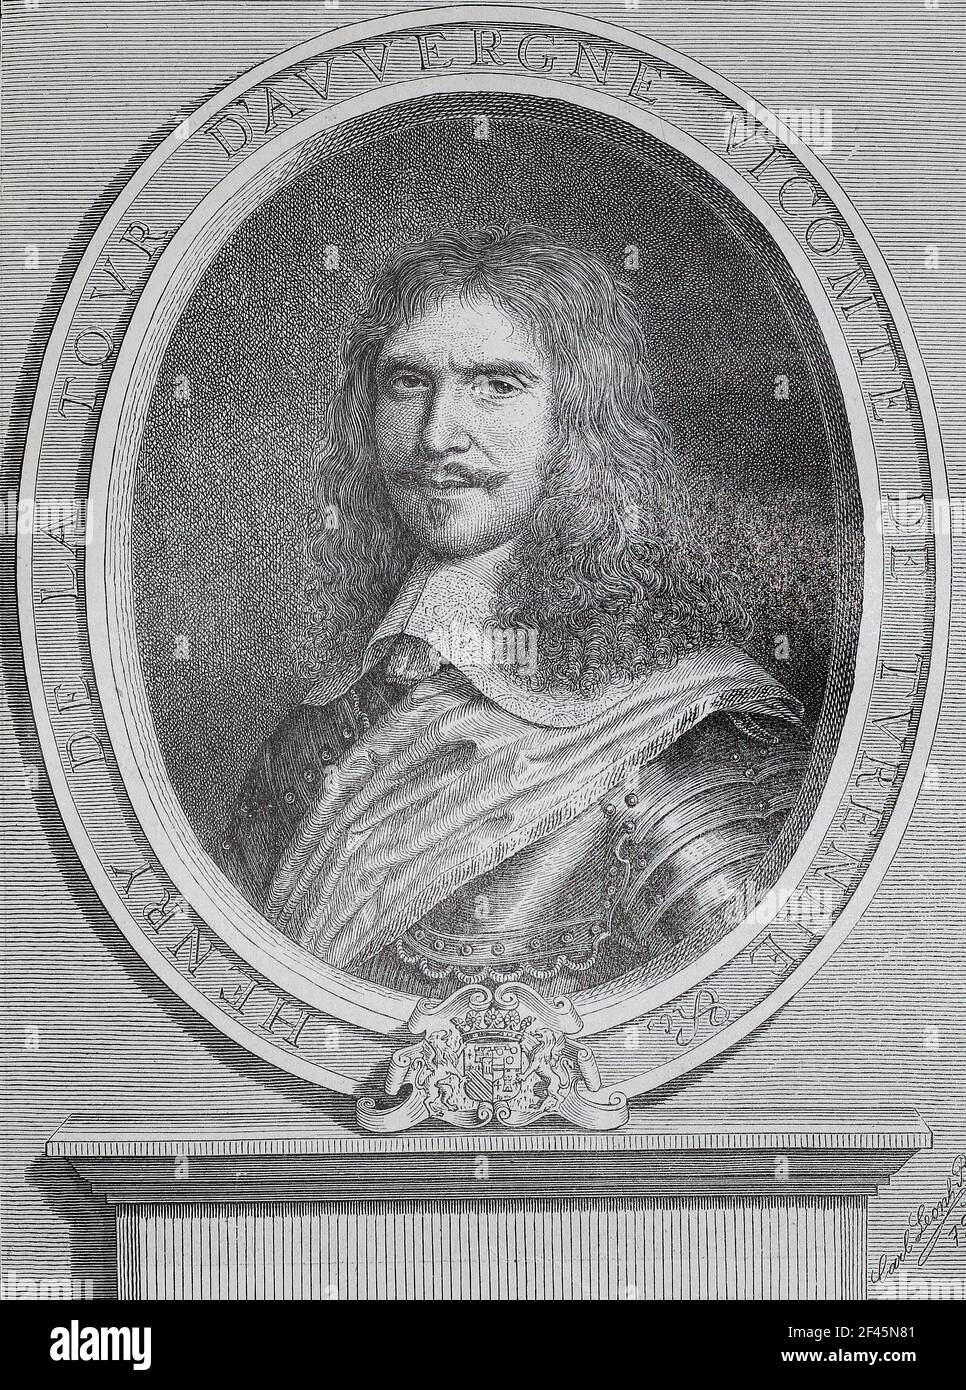 Henri de La Tour d'Auvergne, vicomte de Turenne (1611 – 1675), commonly known as Turenne, was a French general and one of only six Marshals to have been promoted Marshal General of France. The most illustrious member of the La Tour d'Auvergne family, his military exploits over his five-decade career earned him a reputation as one of the greatest military commanders in modern history. Stock Photo